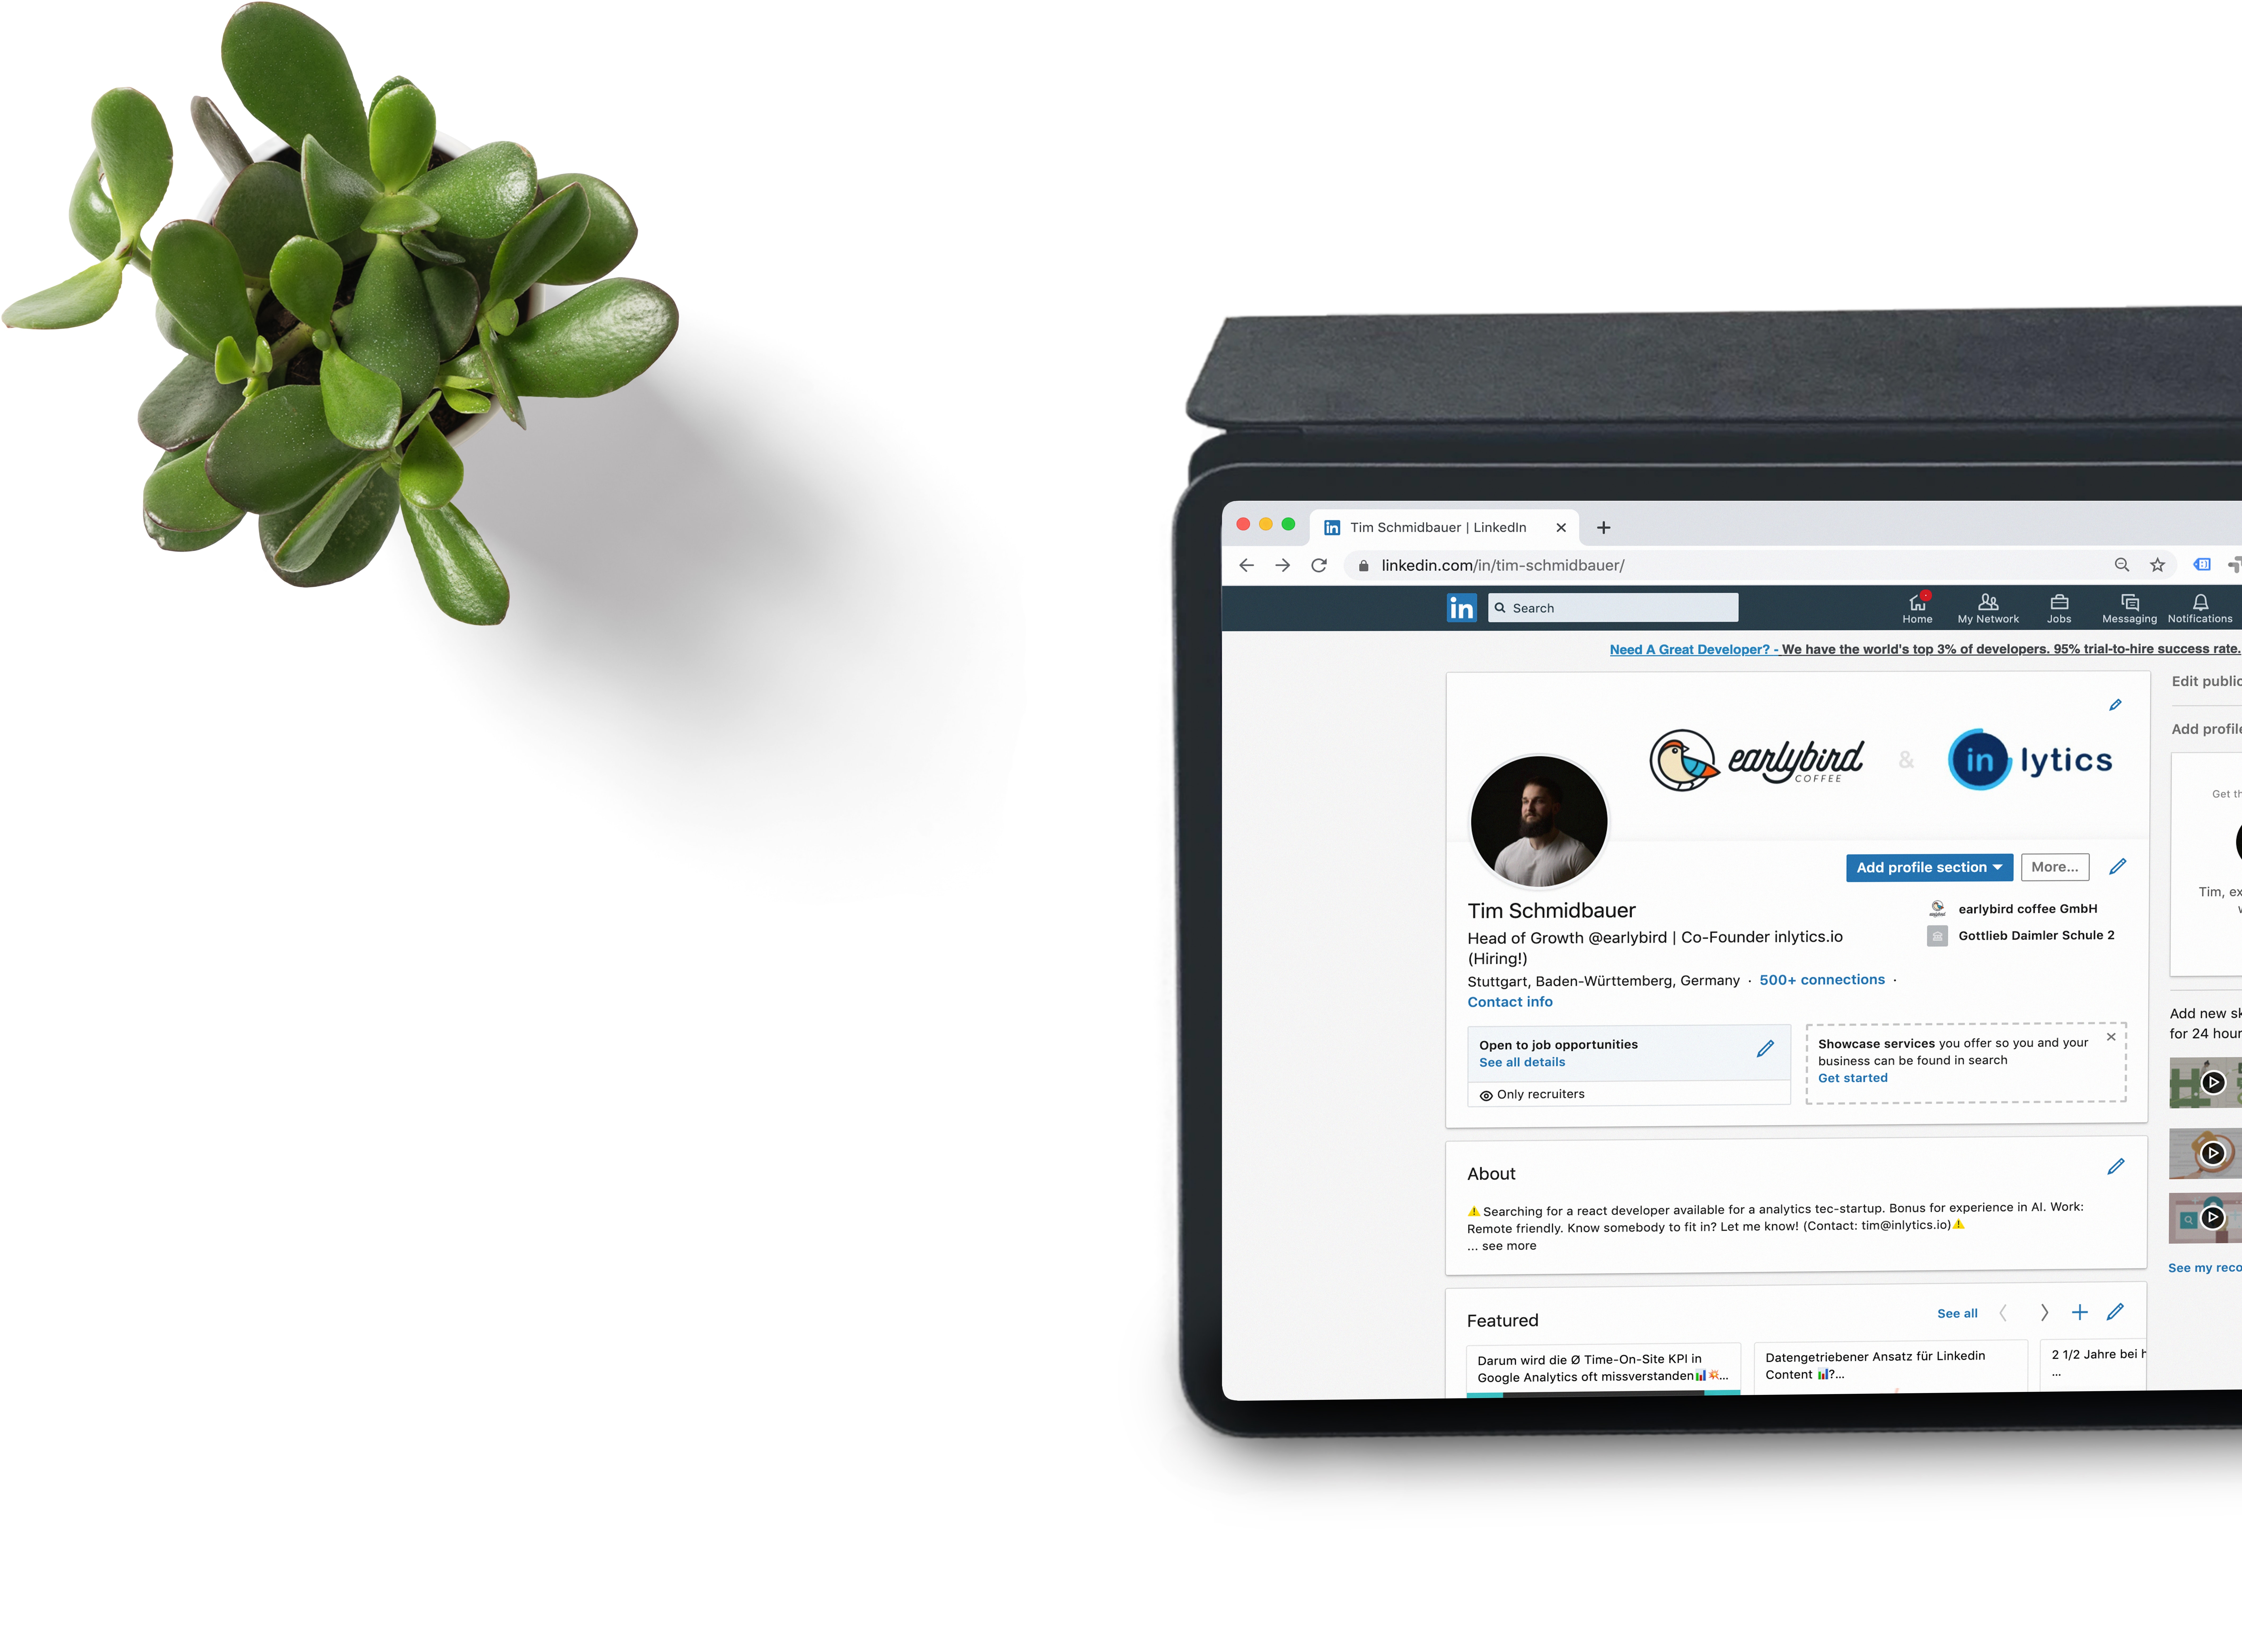 How to Optimize, Enhance and Fine Tune Your LinkedIn Profile